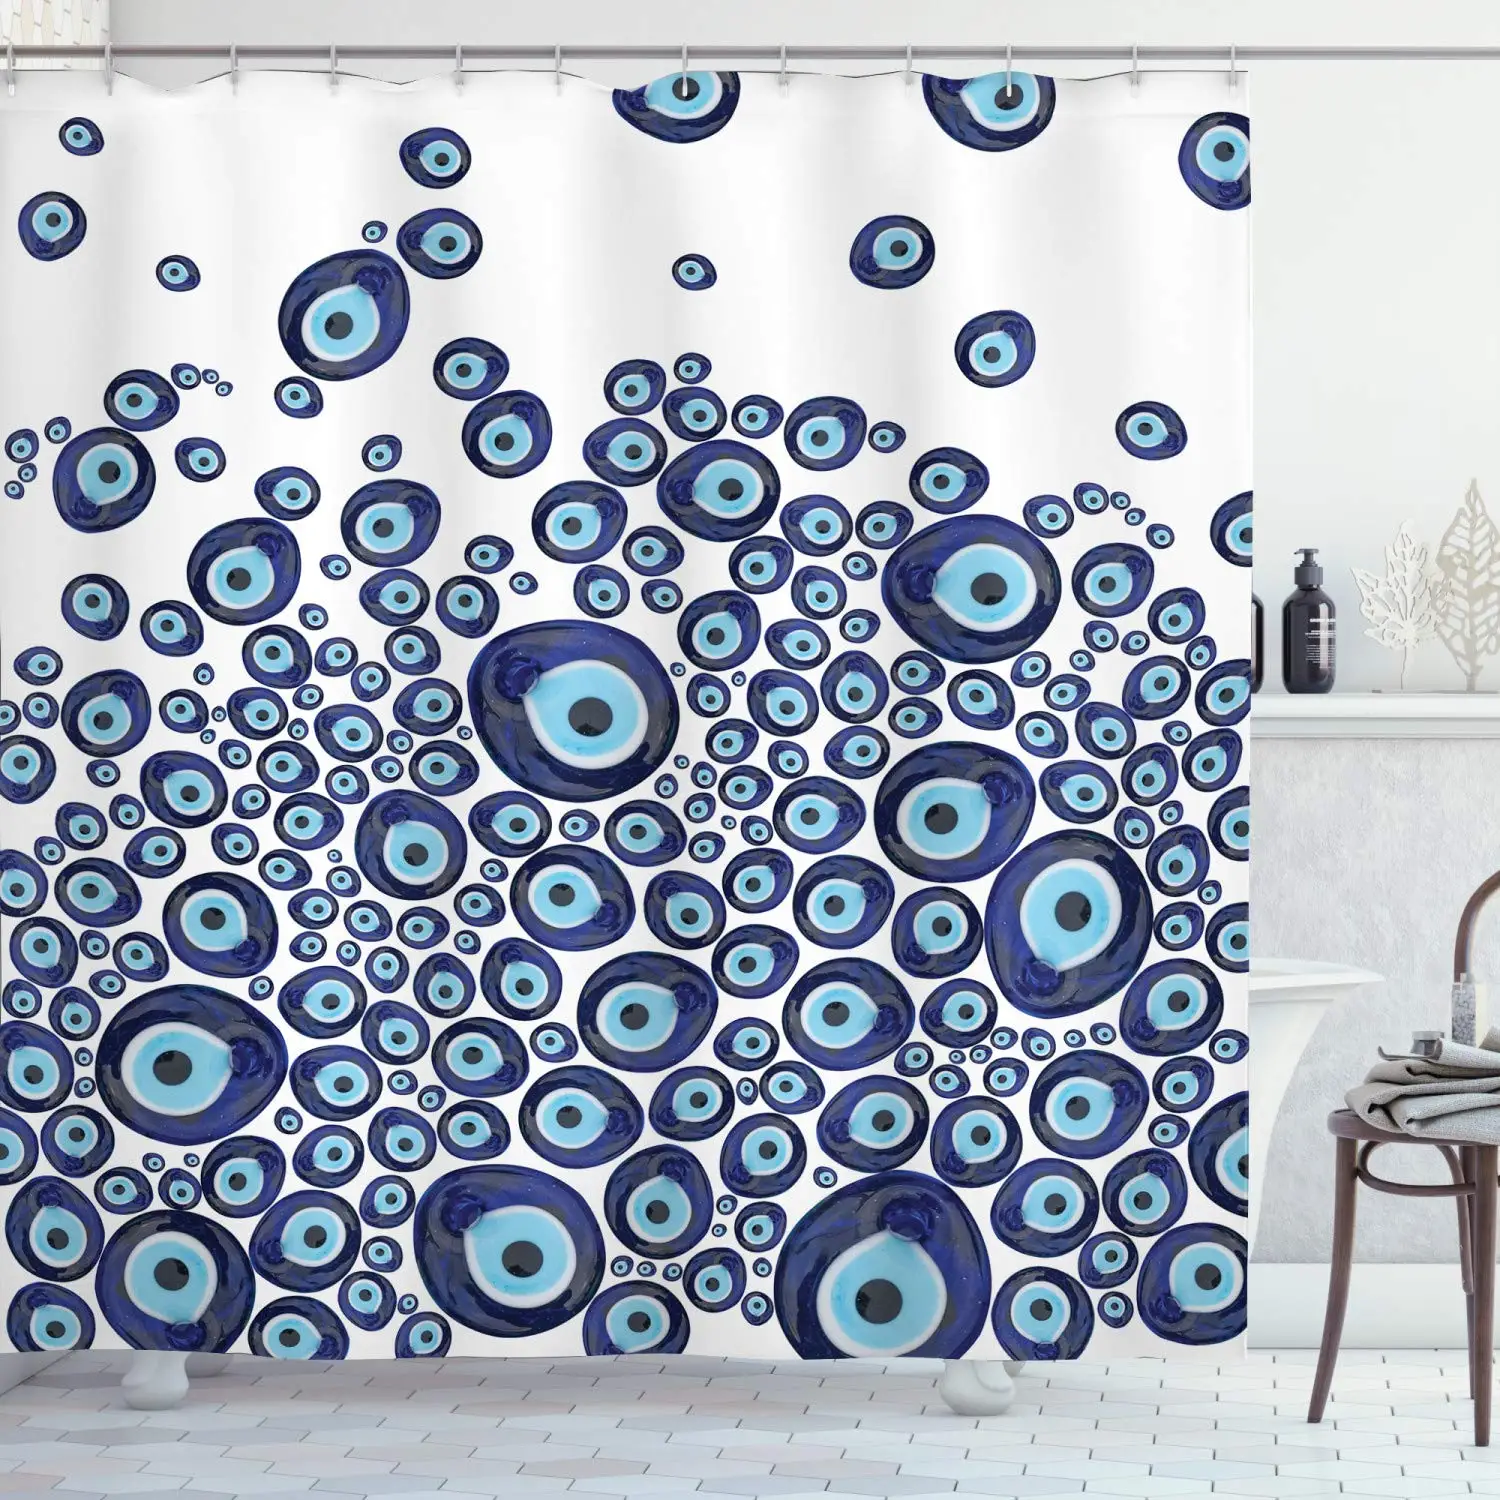 

Evil Eye Shower Curtain,Luck Glass Look Beads Graphic on Plain Background,Waterproof Cloth Fabric Bathroom Decor Sets with Hooks